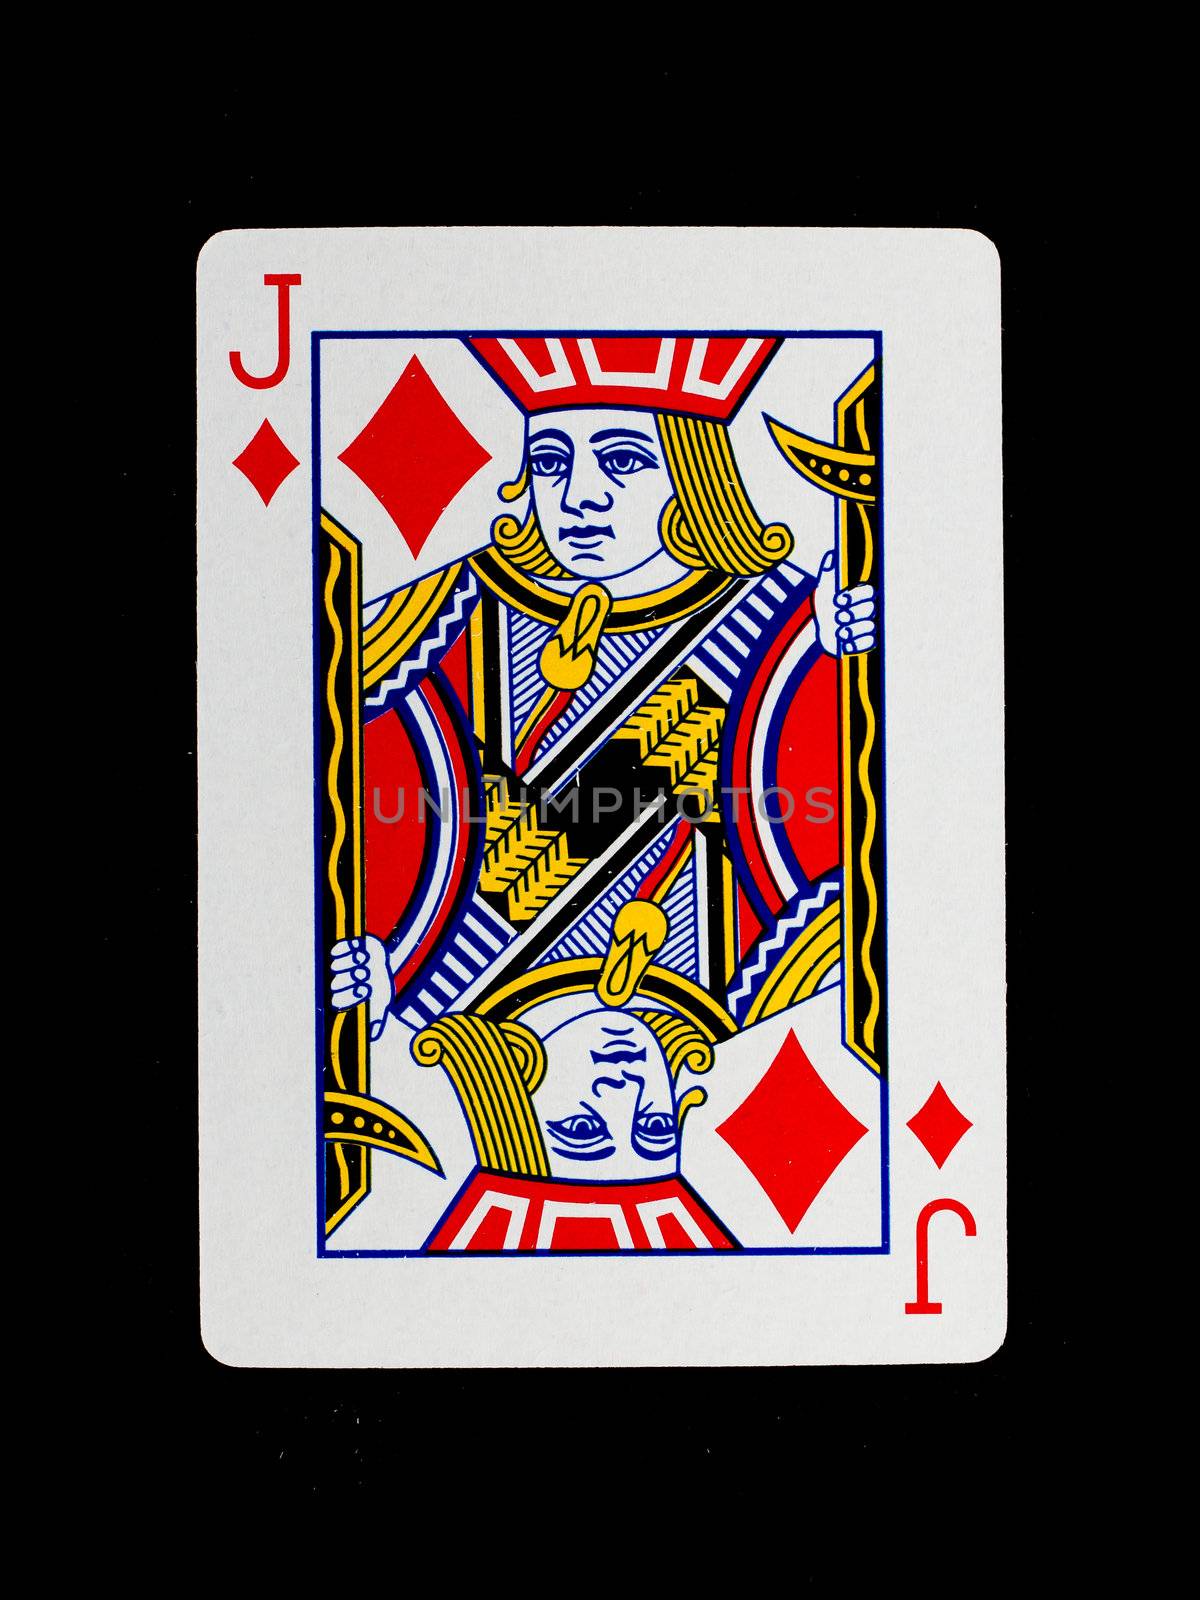 Playing card (jack) isolated on a black background